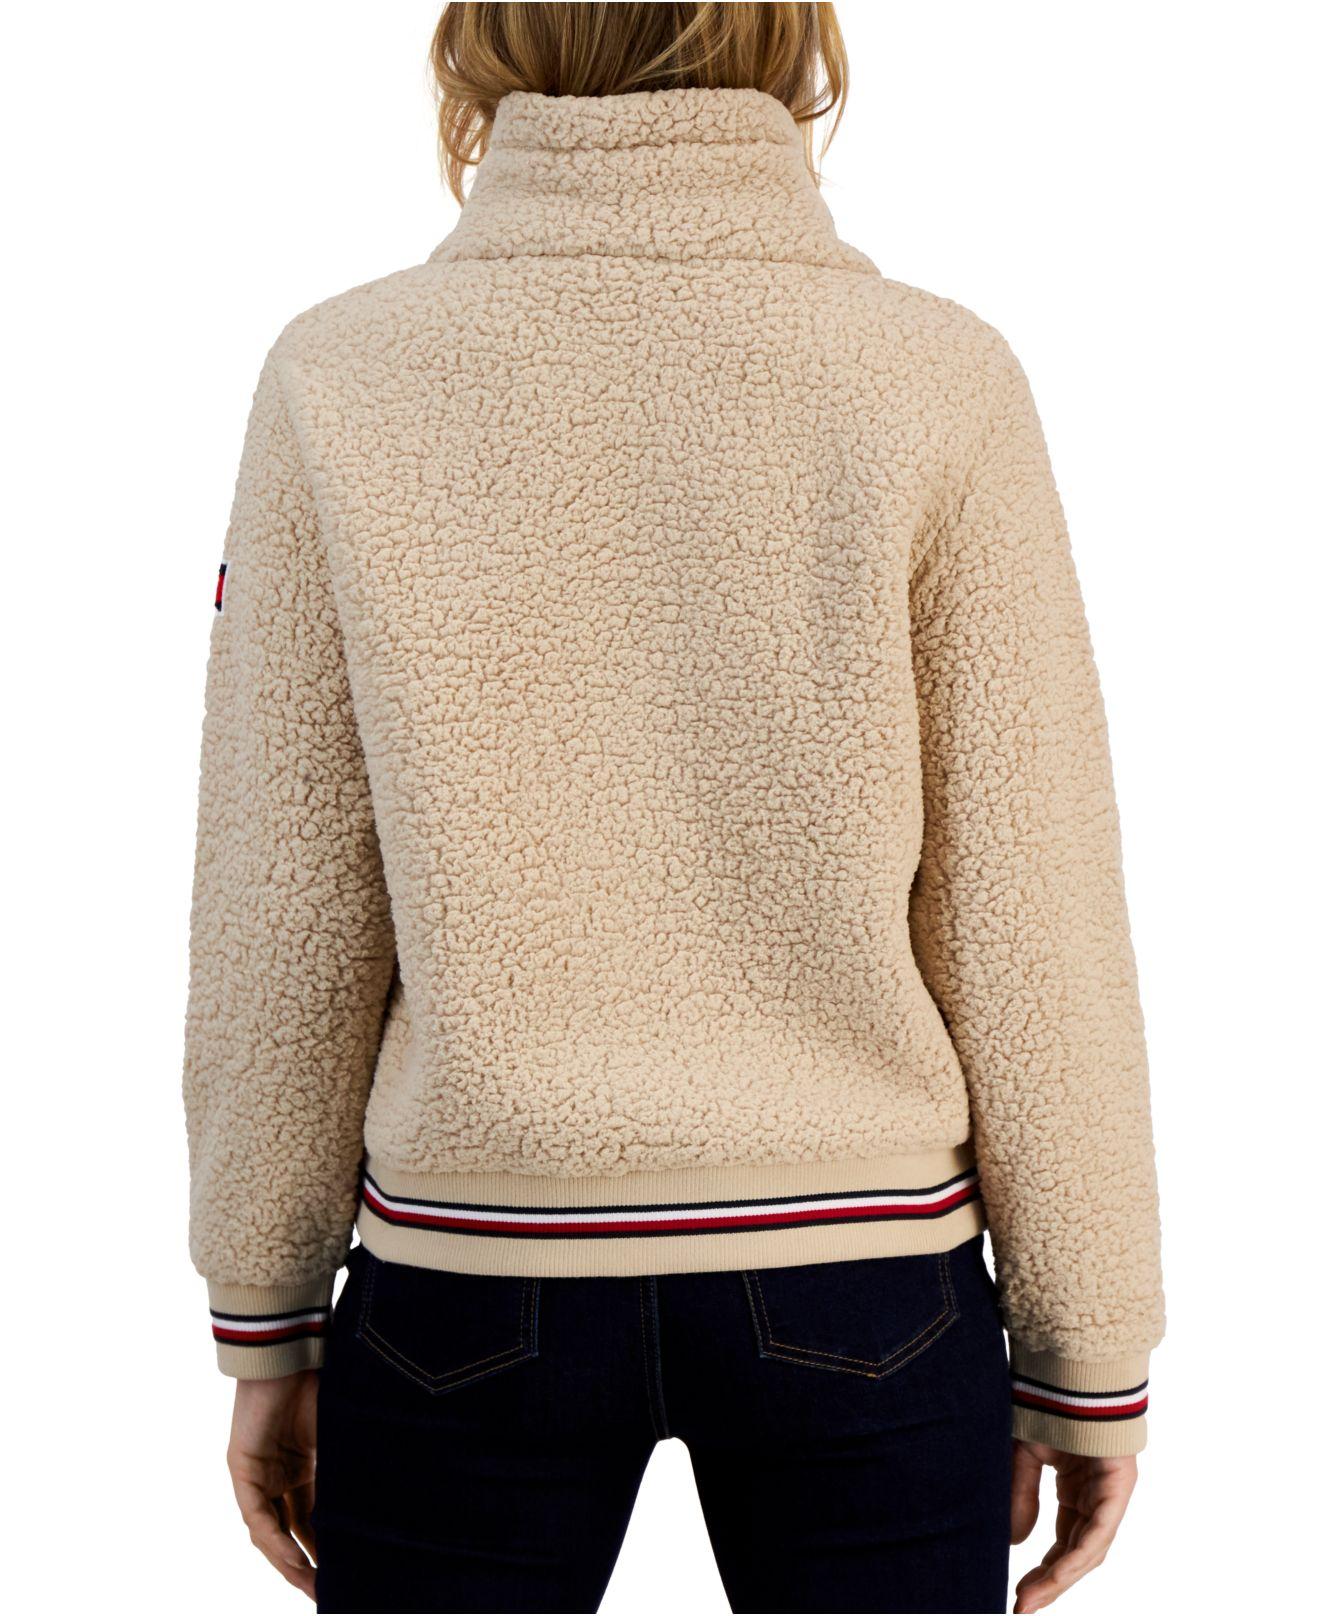 Tommy Hilfiger Sherpa Bomber Jacket in Natural | Lyst